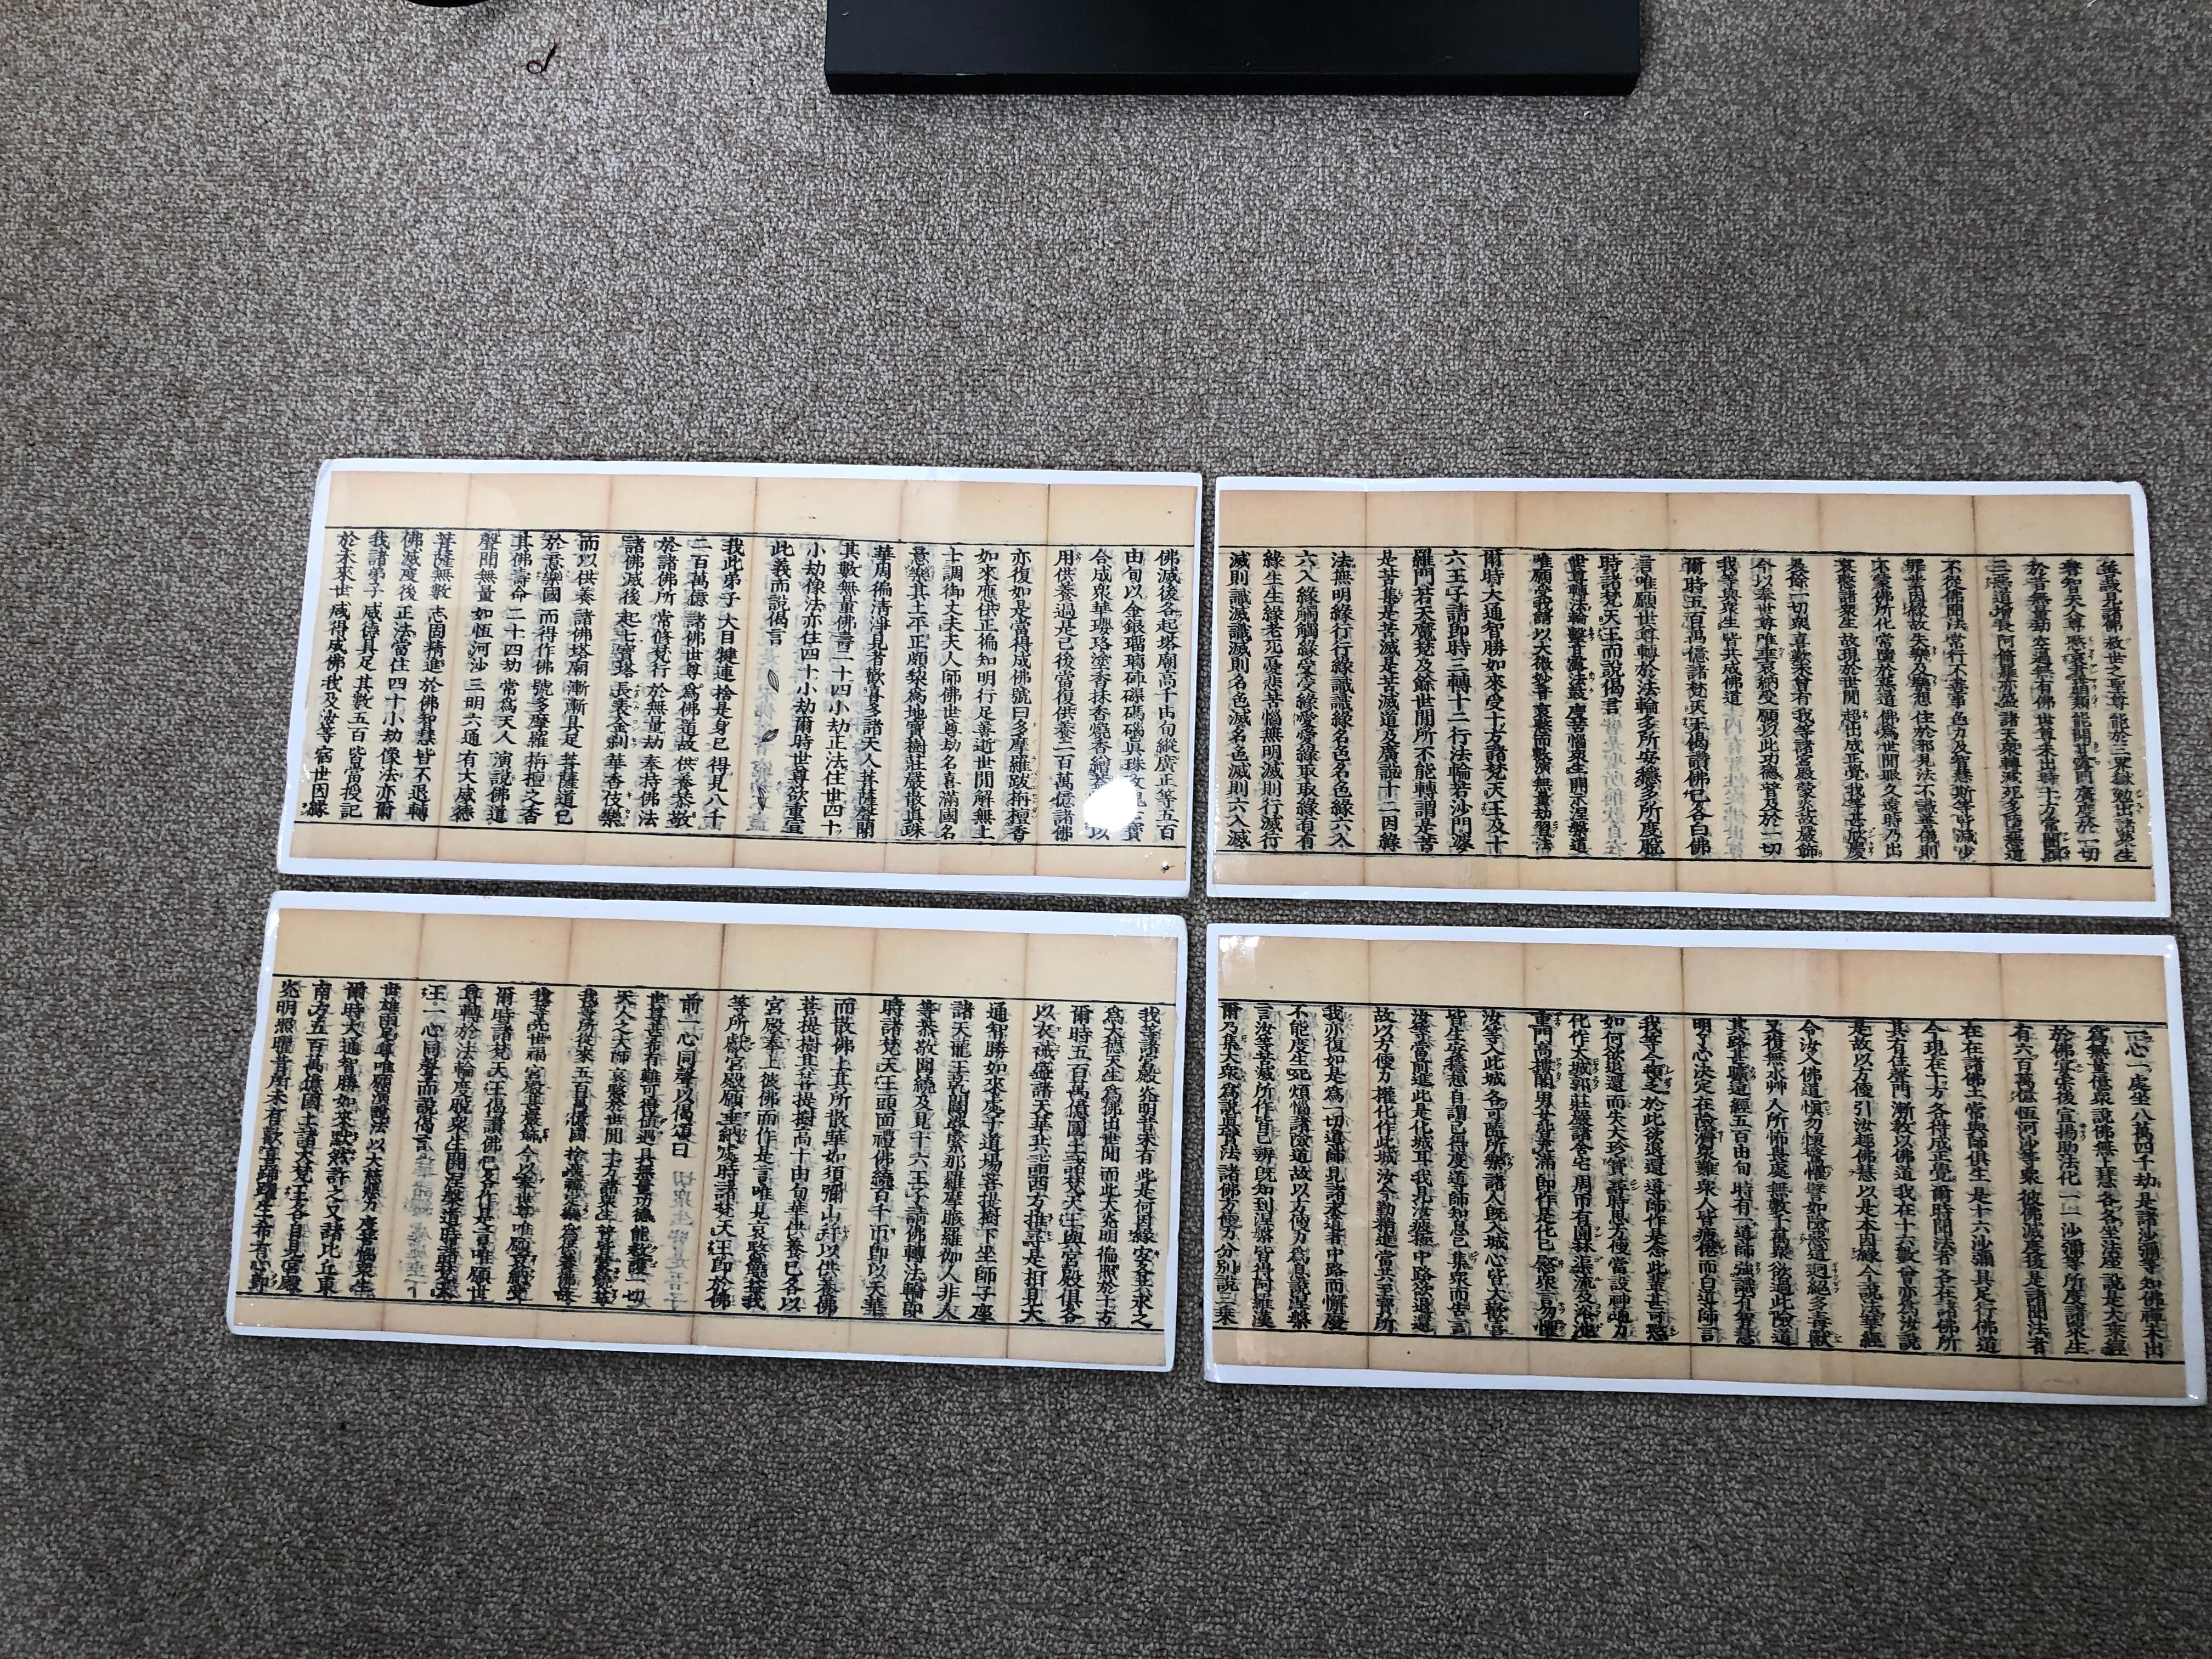 Japan four antique Buddhist Sutras woodblock prints, from an original book dated 1878, Immediately Frameable #1

Printed on handmade washi, mulberry paper.

Dated to Meiji 11 (1878) originally found in Tokyo, Japan 

These rare woodblock